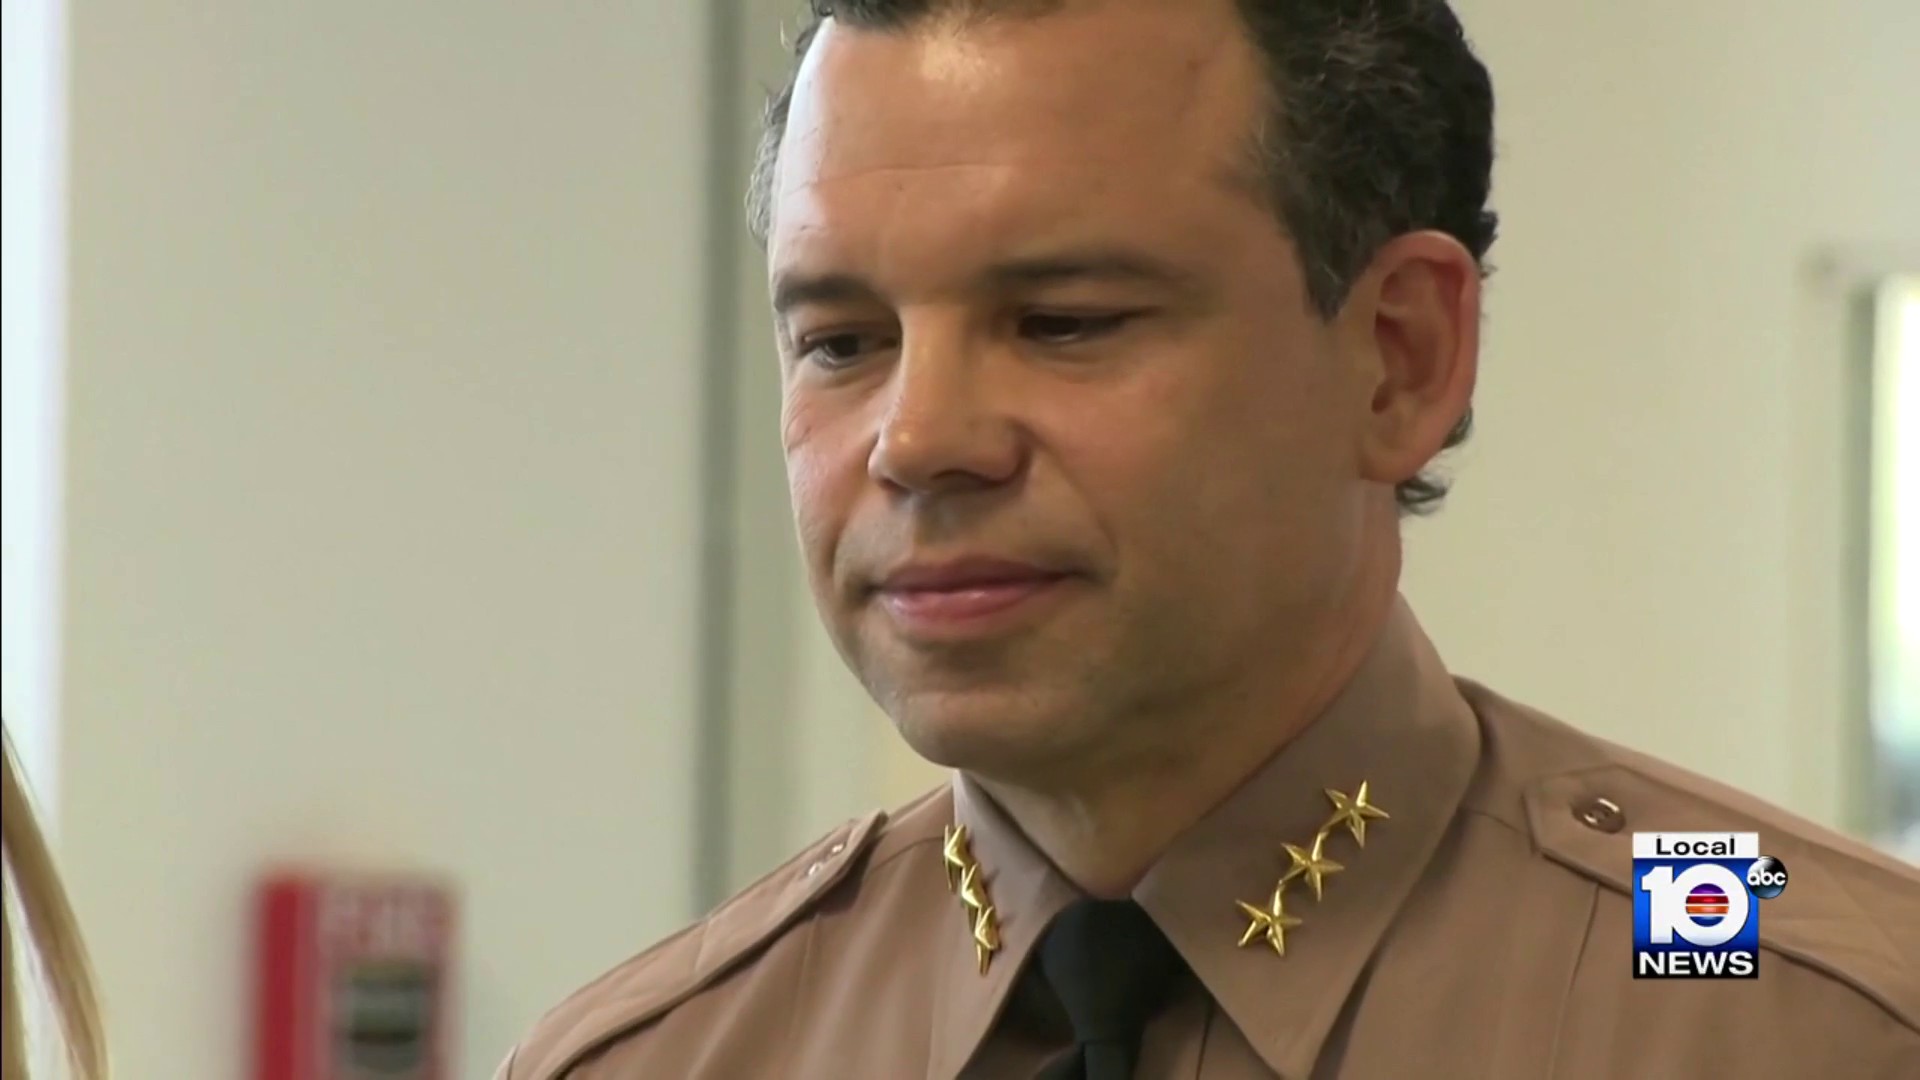 Sources Miami-Dade Police Director Freddy Ramirez has been speaking from hospital pic